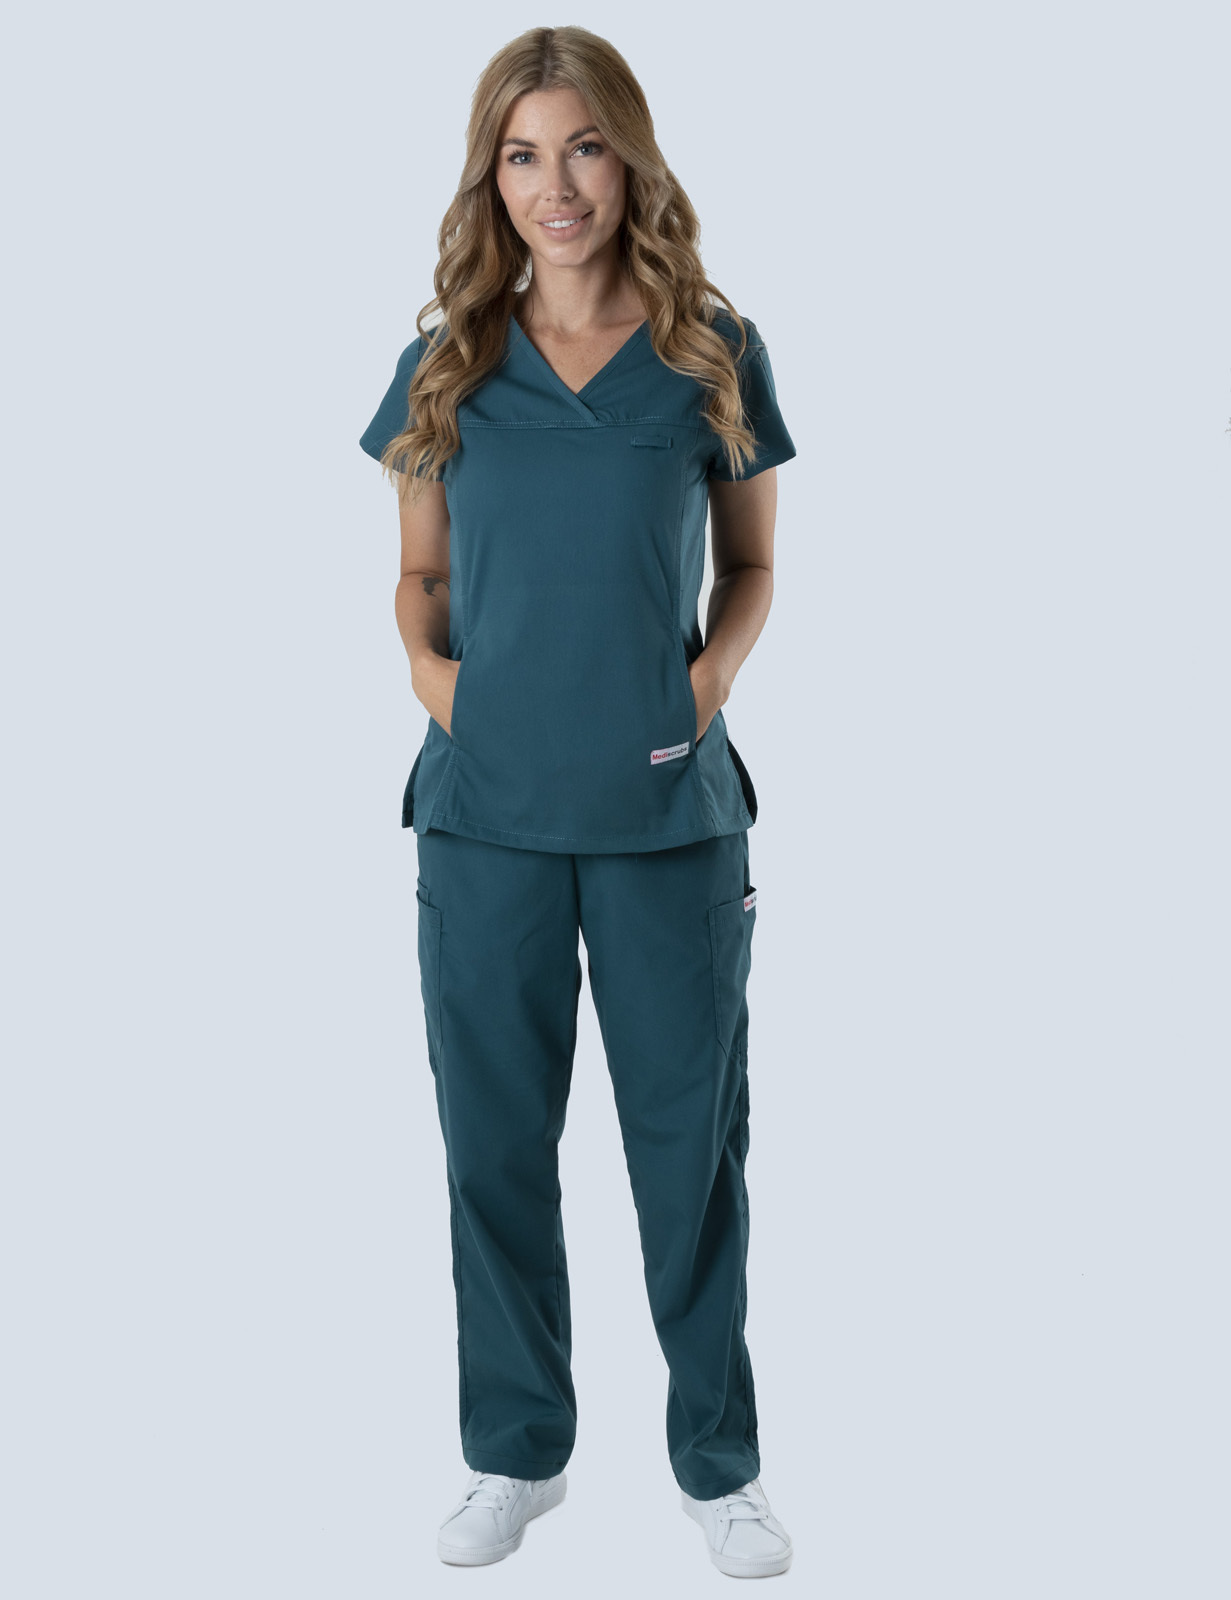 Rockhampton Base Hospital - ED CN (Women's Fit Solid Scrub Top and Cargo Pants in Caribbean incl Logos)